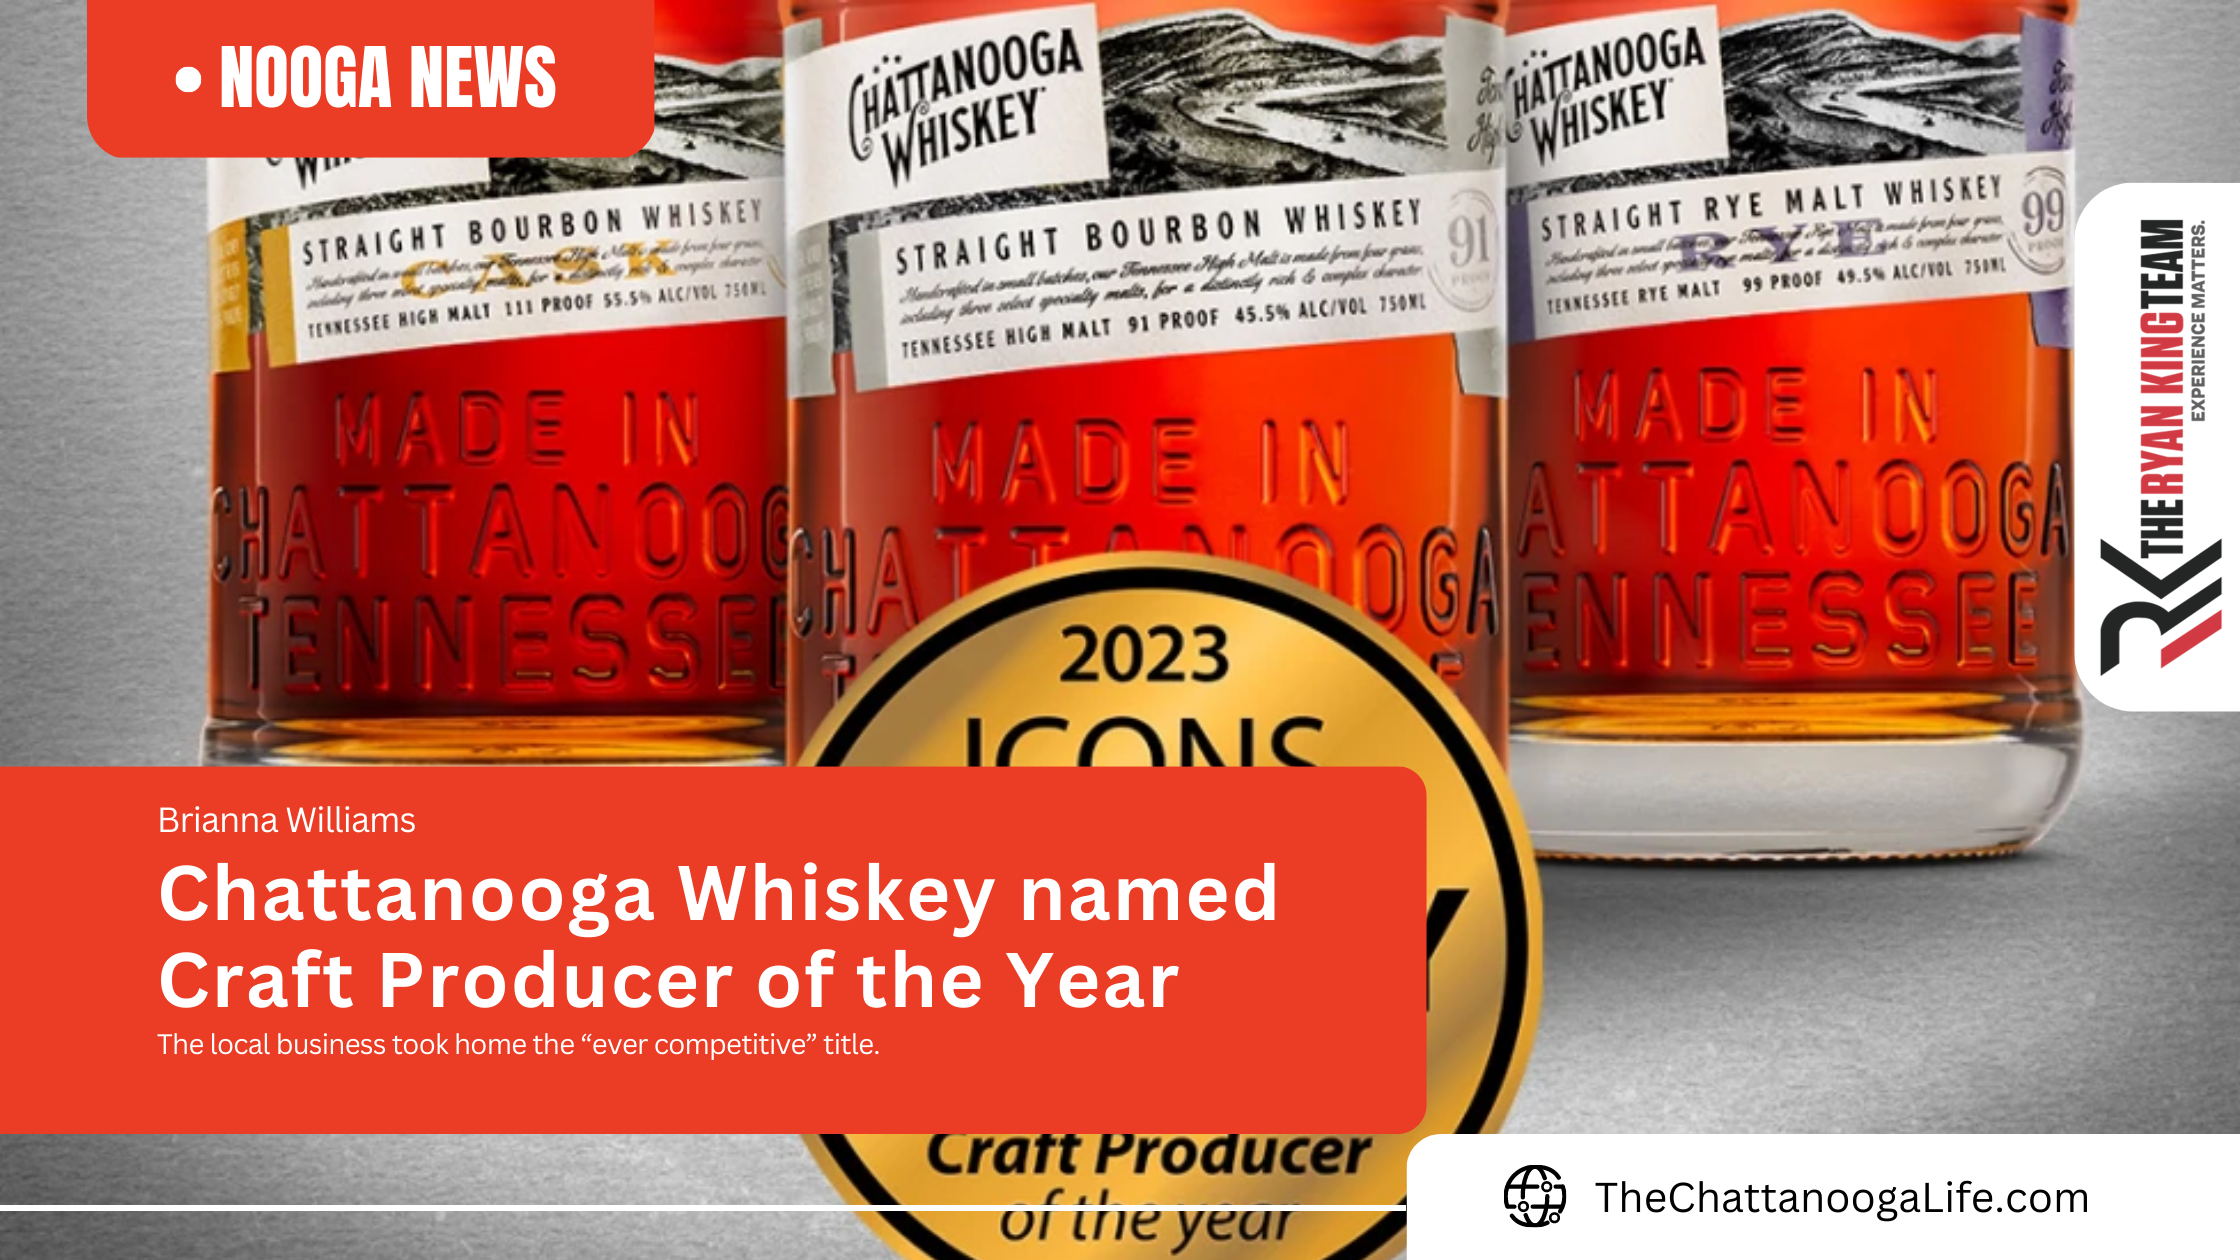 Chattanooga Whiskey named Craft Producer of the Year